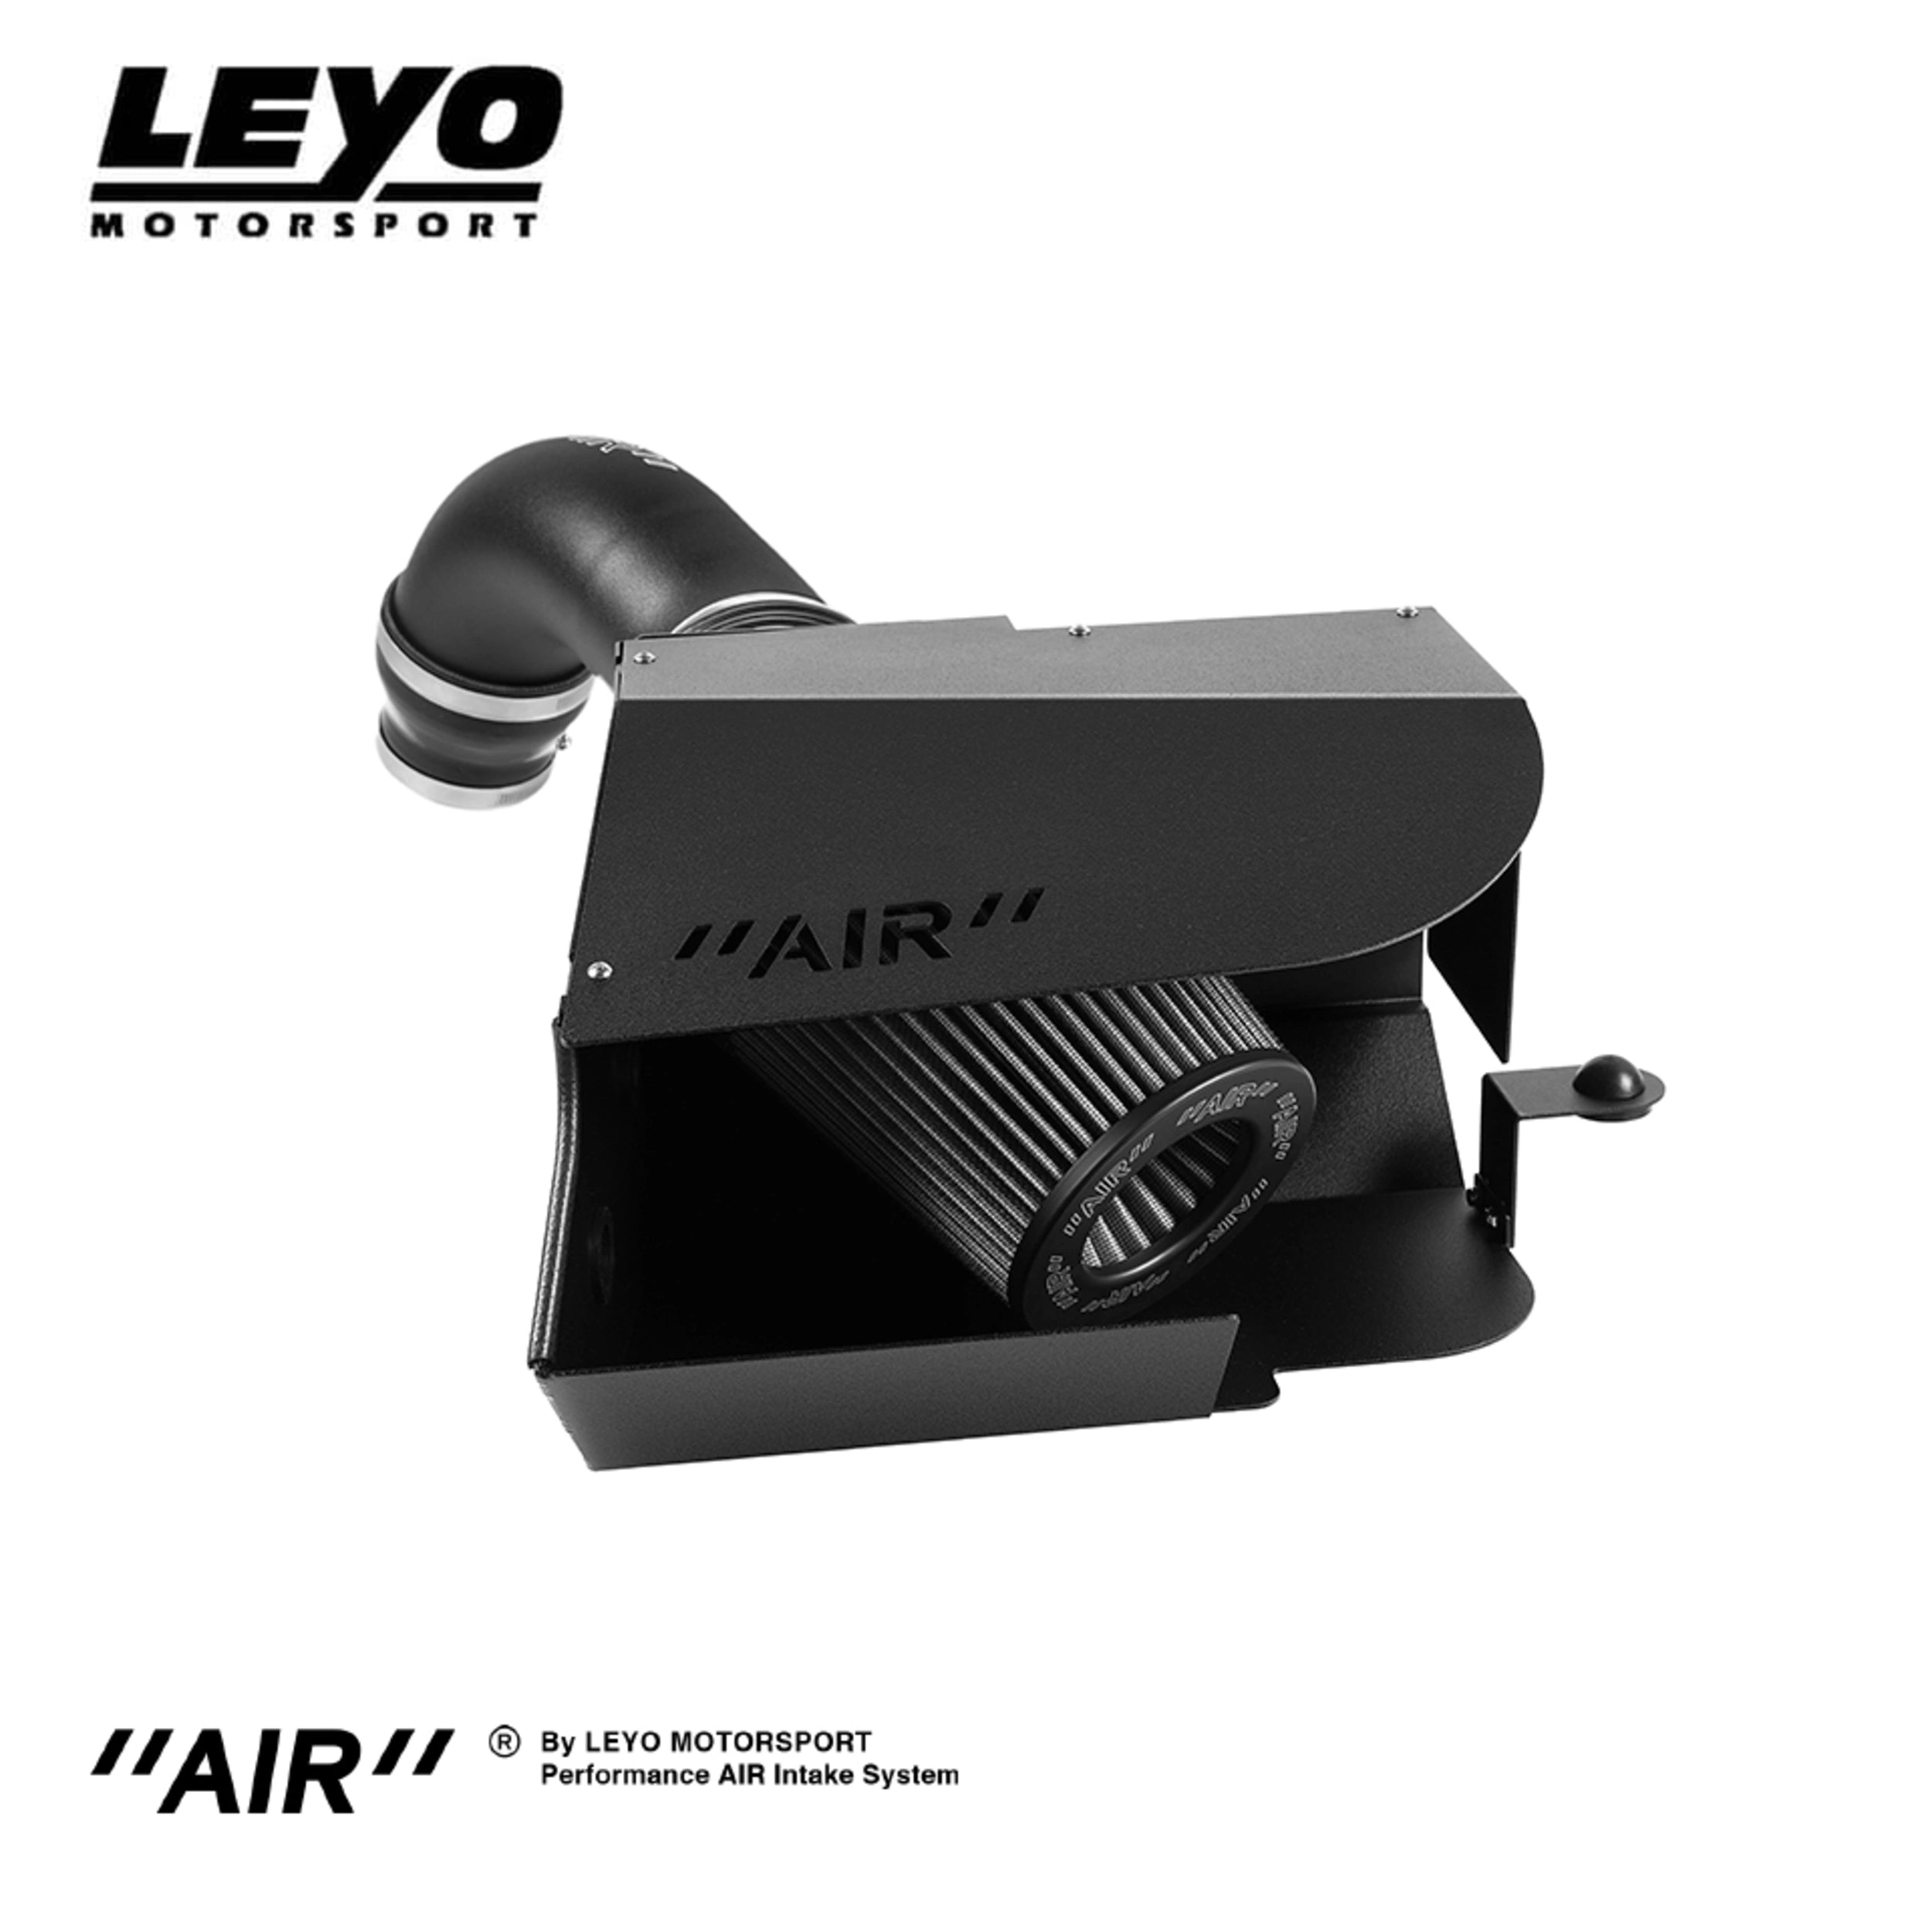 LEYO AIR Cold Air Intake System V2 for Audi A3, S3 8V/TT 8S/VW Golf GTI, R Mk7-7.5 (1.8T/2.0T)